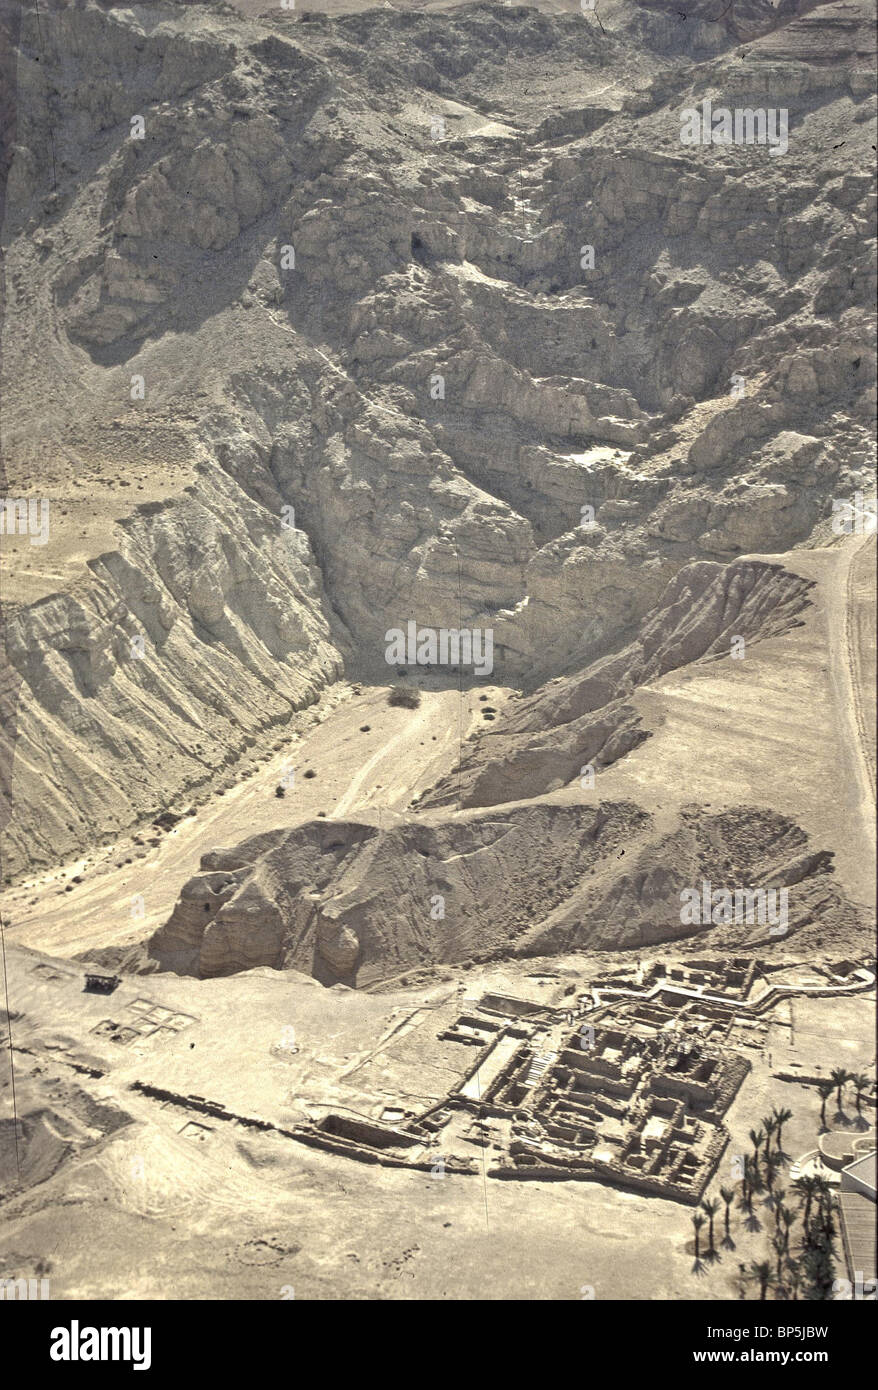 3738. QUMRAN - THE ESSENES SETTLEMENT WITH  WADI QUMRAN  AND THE WILDERNESS OF JUDEA Stock Photo